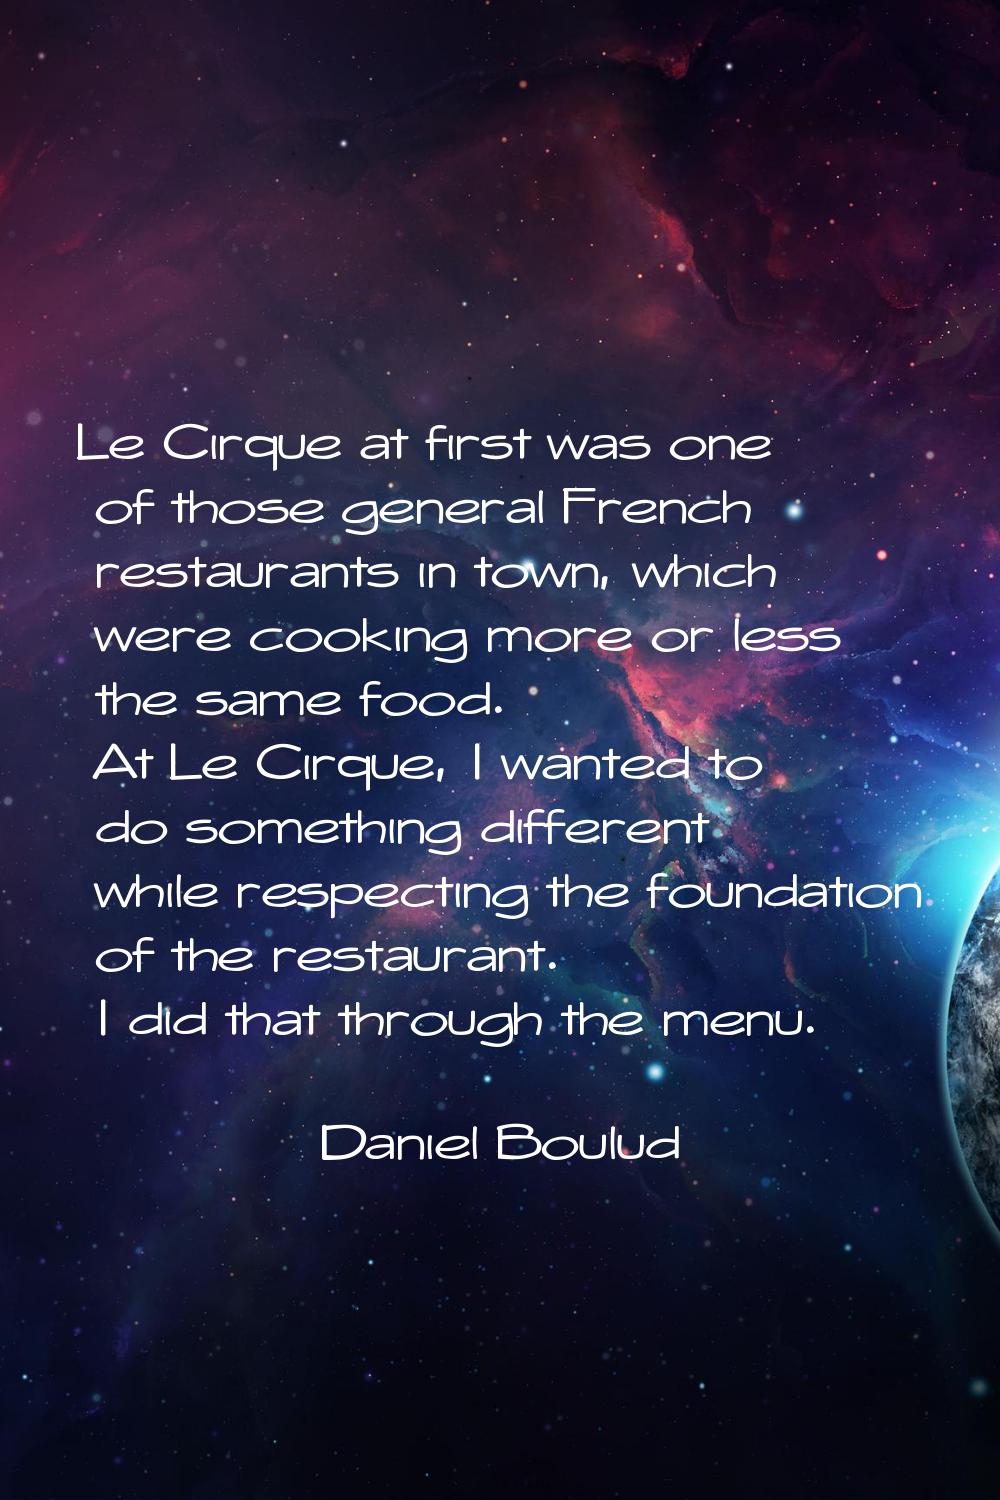 Le Cirque at first was one of those general French restaurants in town, which were cooking more or 